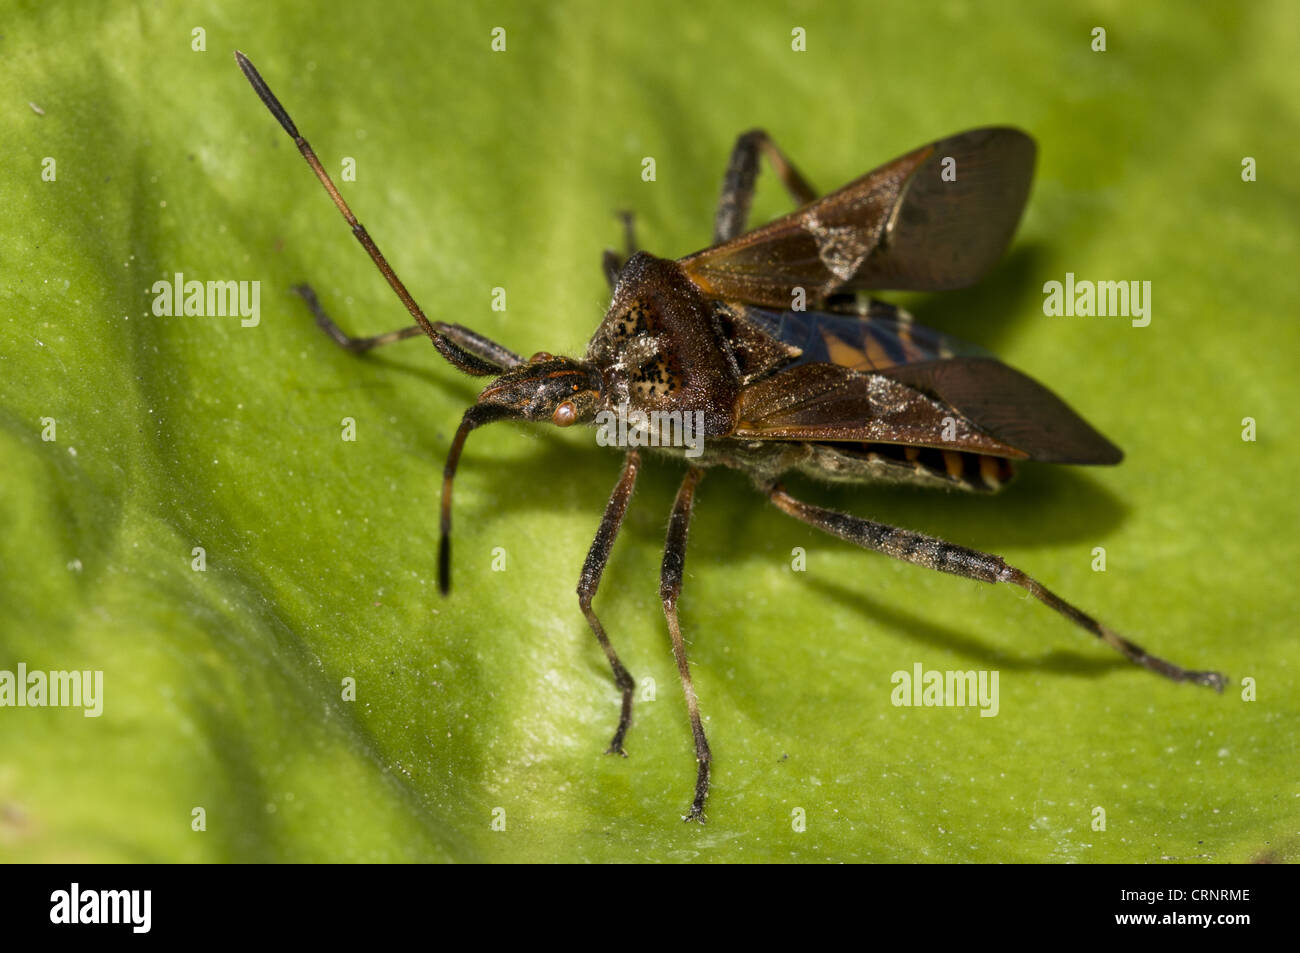 Western Conifer Seedbug (Leptoglossus occidentalis) introduced invasive species, adult, with wing cases opening, resting on Stock Photo